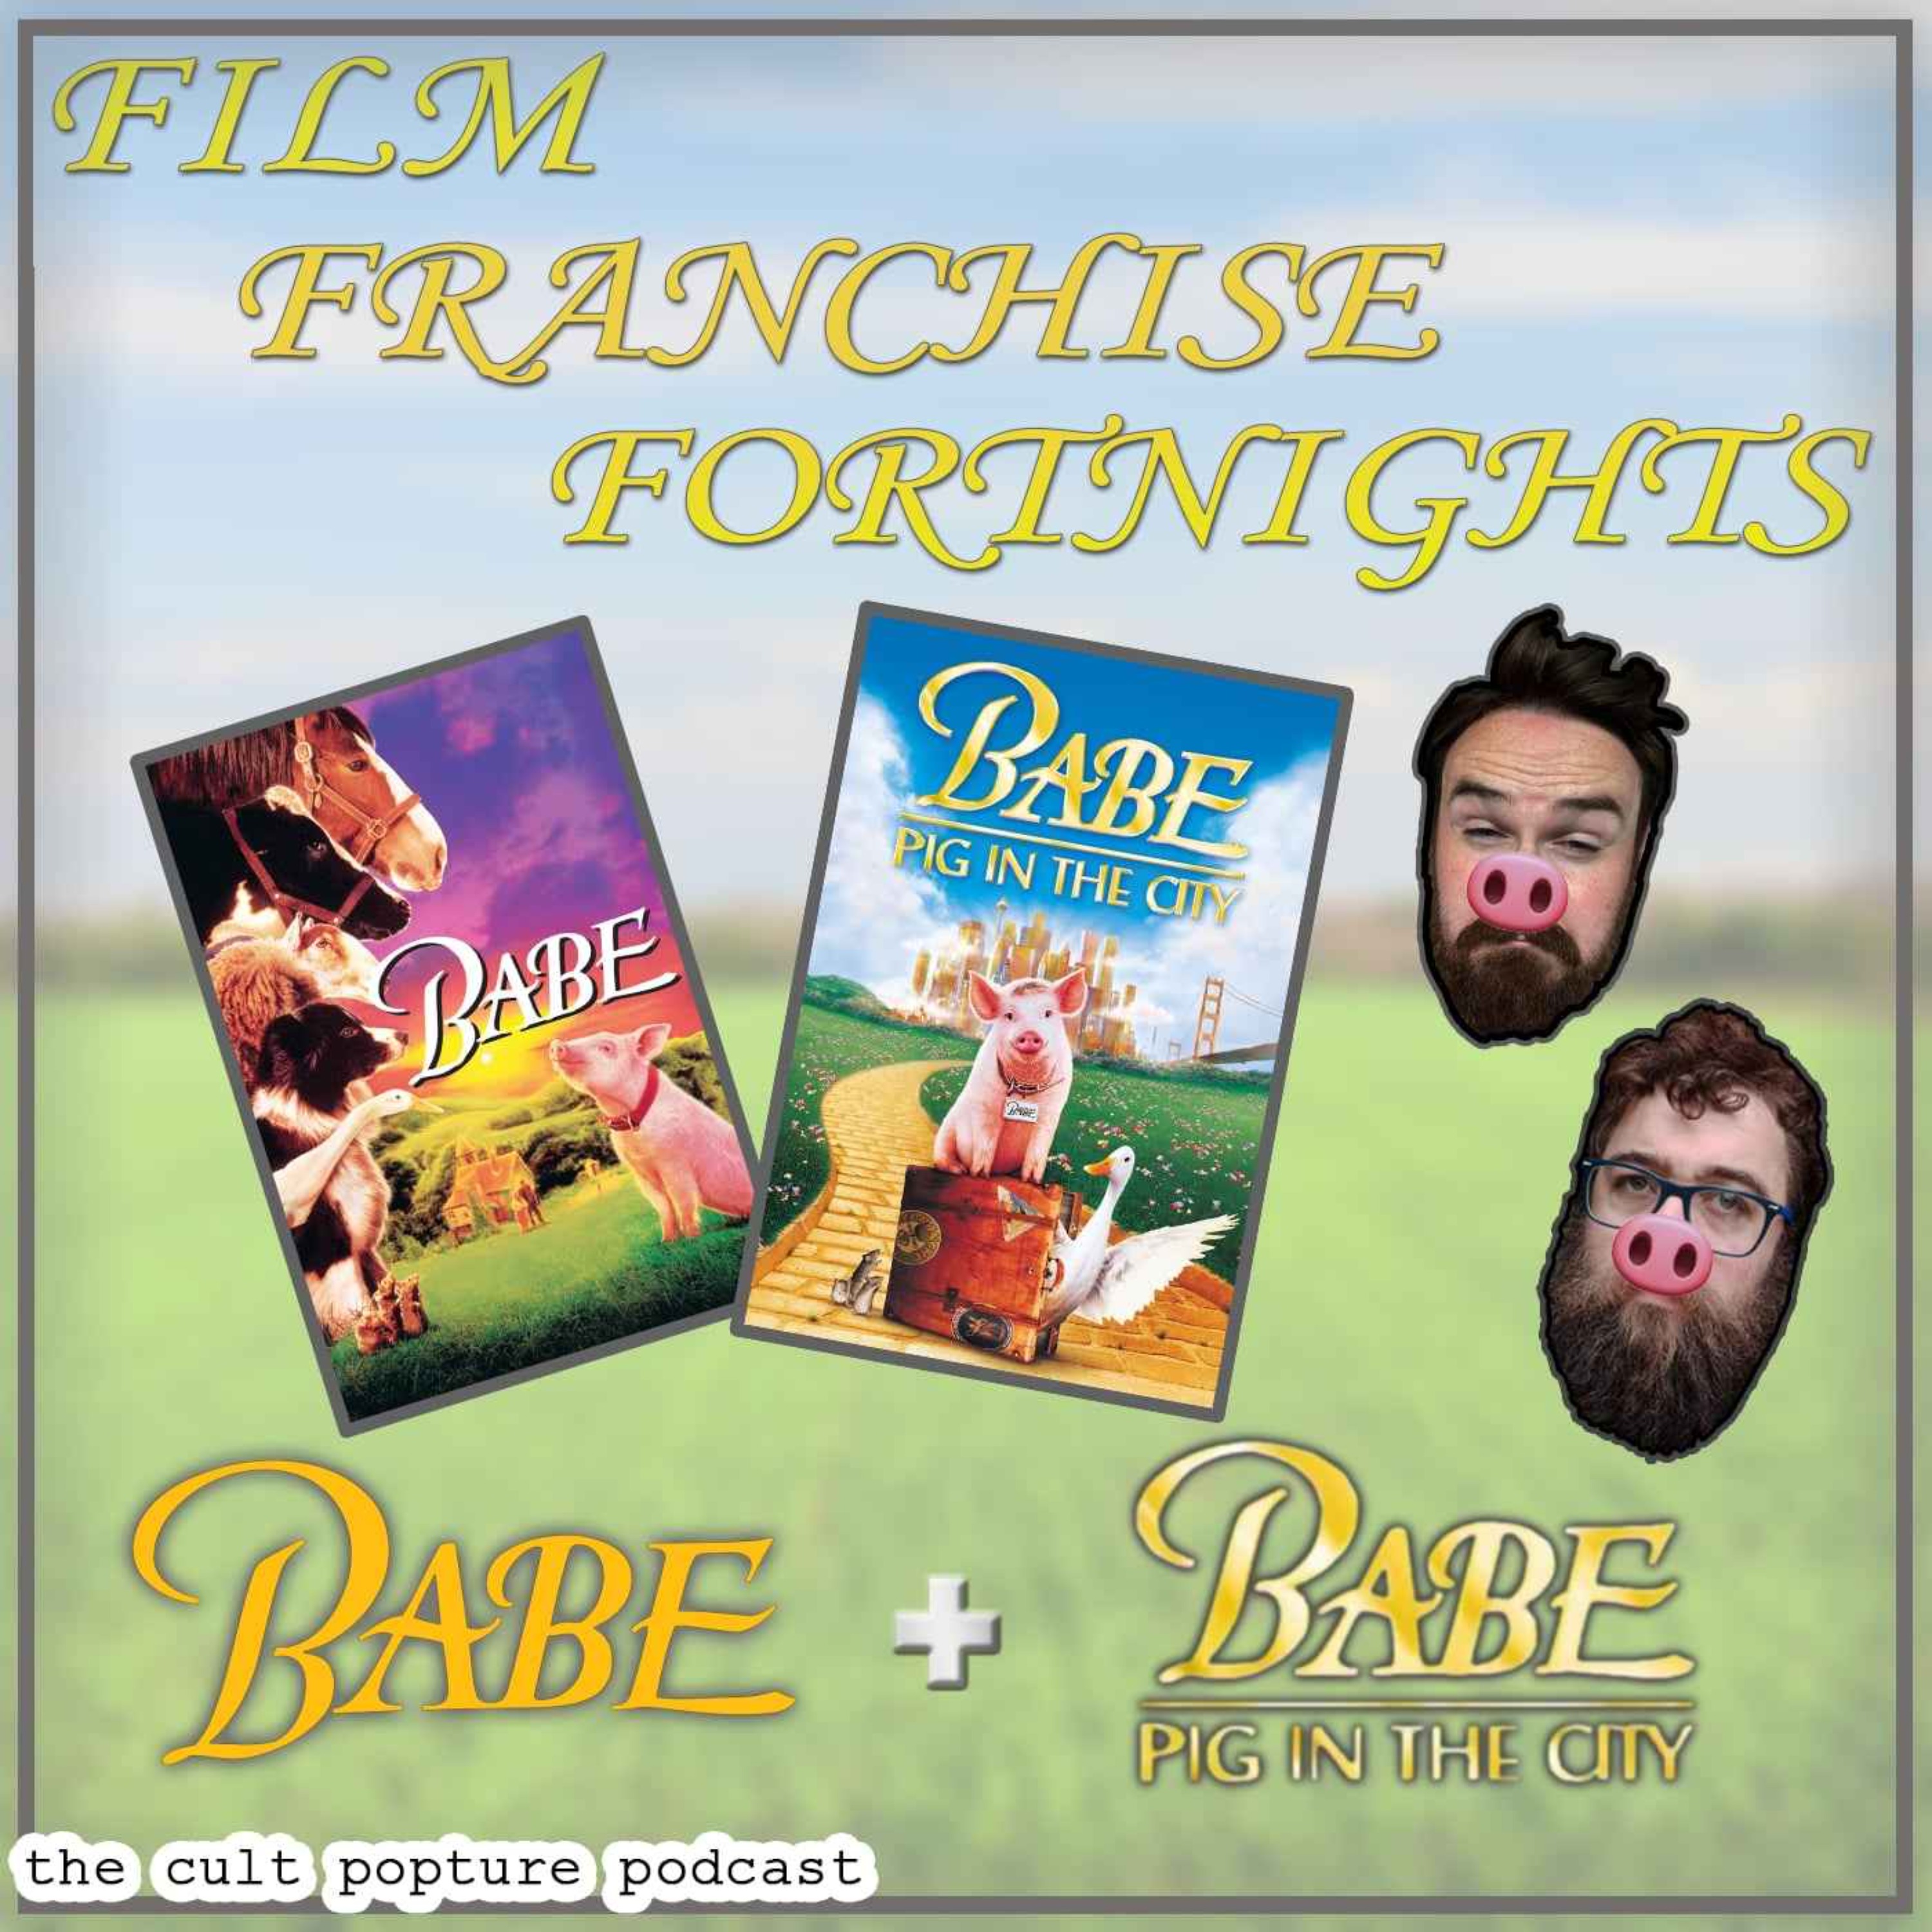 ”Babe” & ”Babe: Pig in the City” | Film Franchise Fortnights